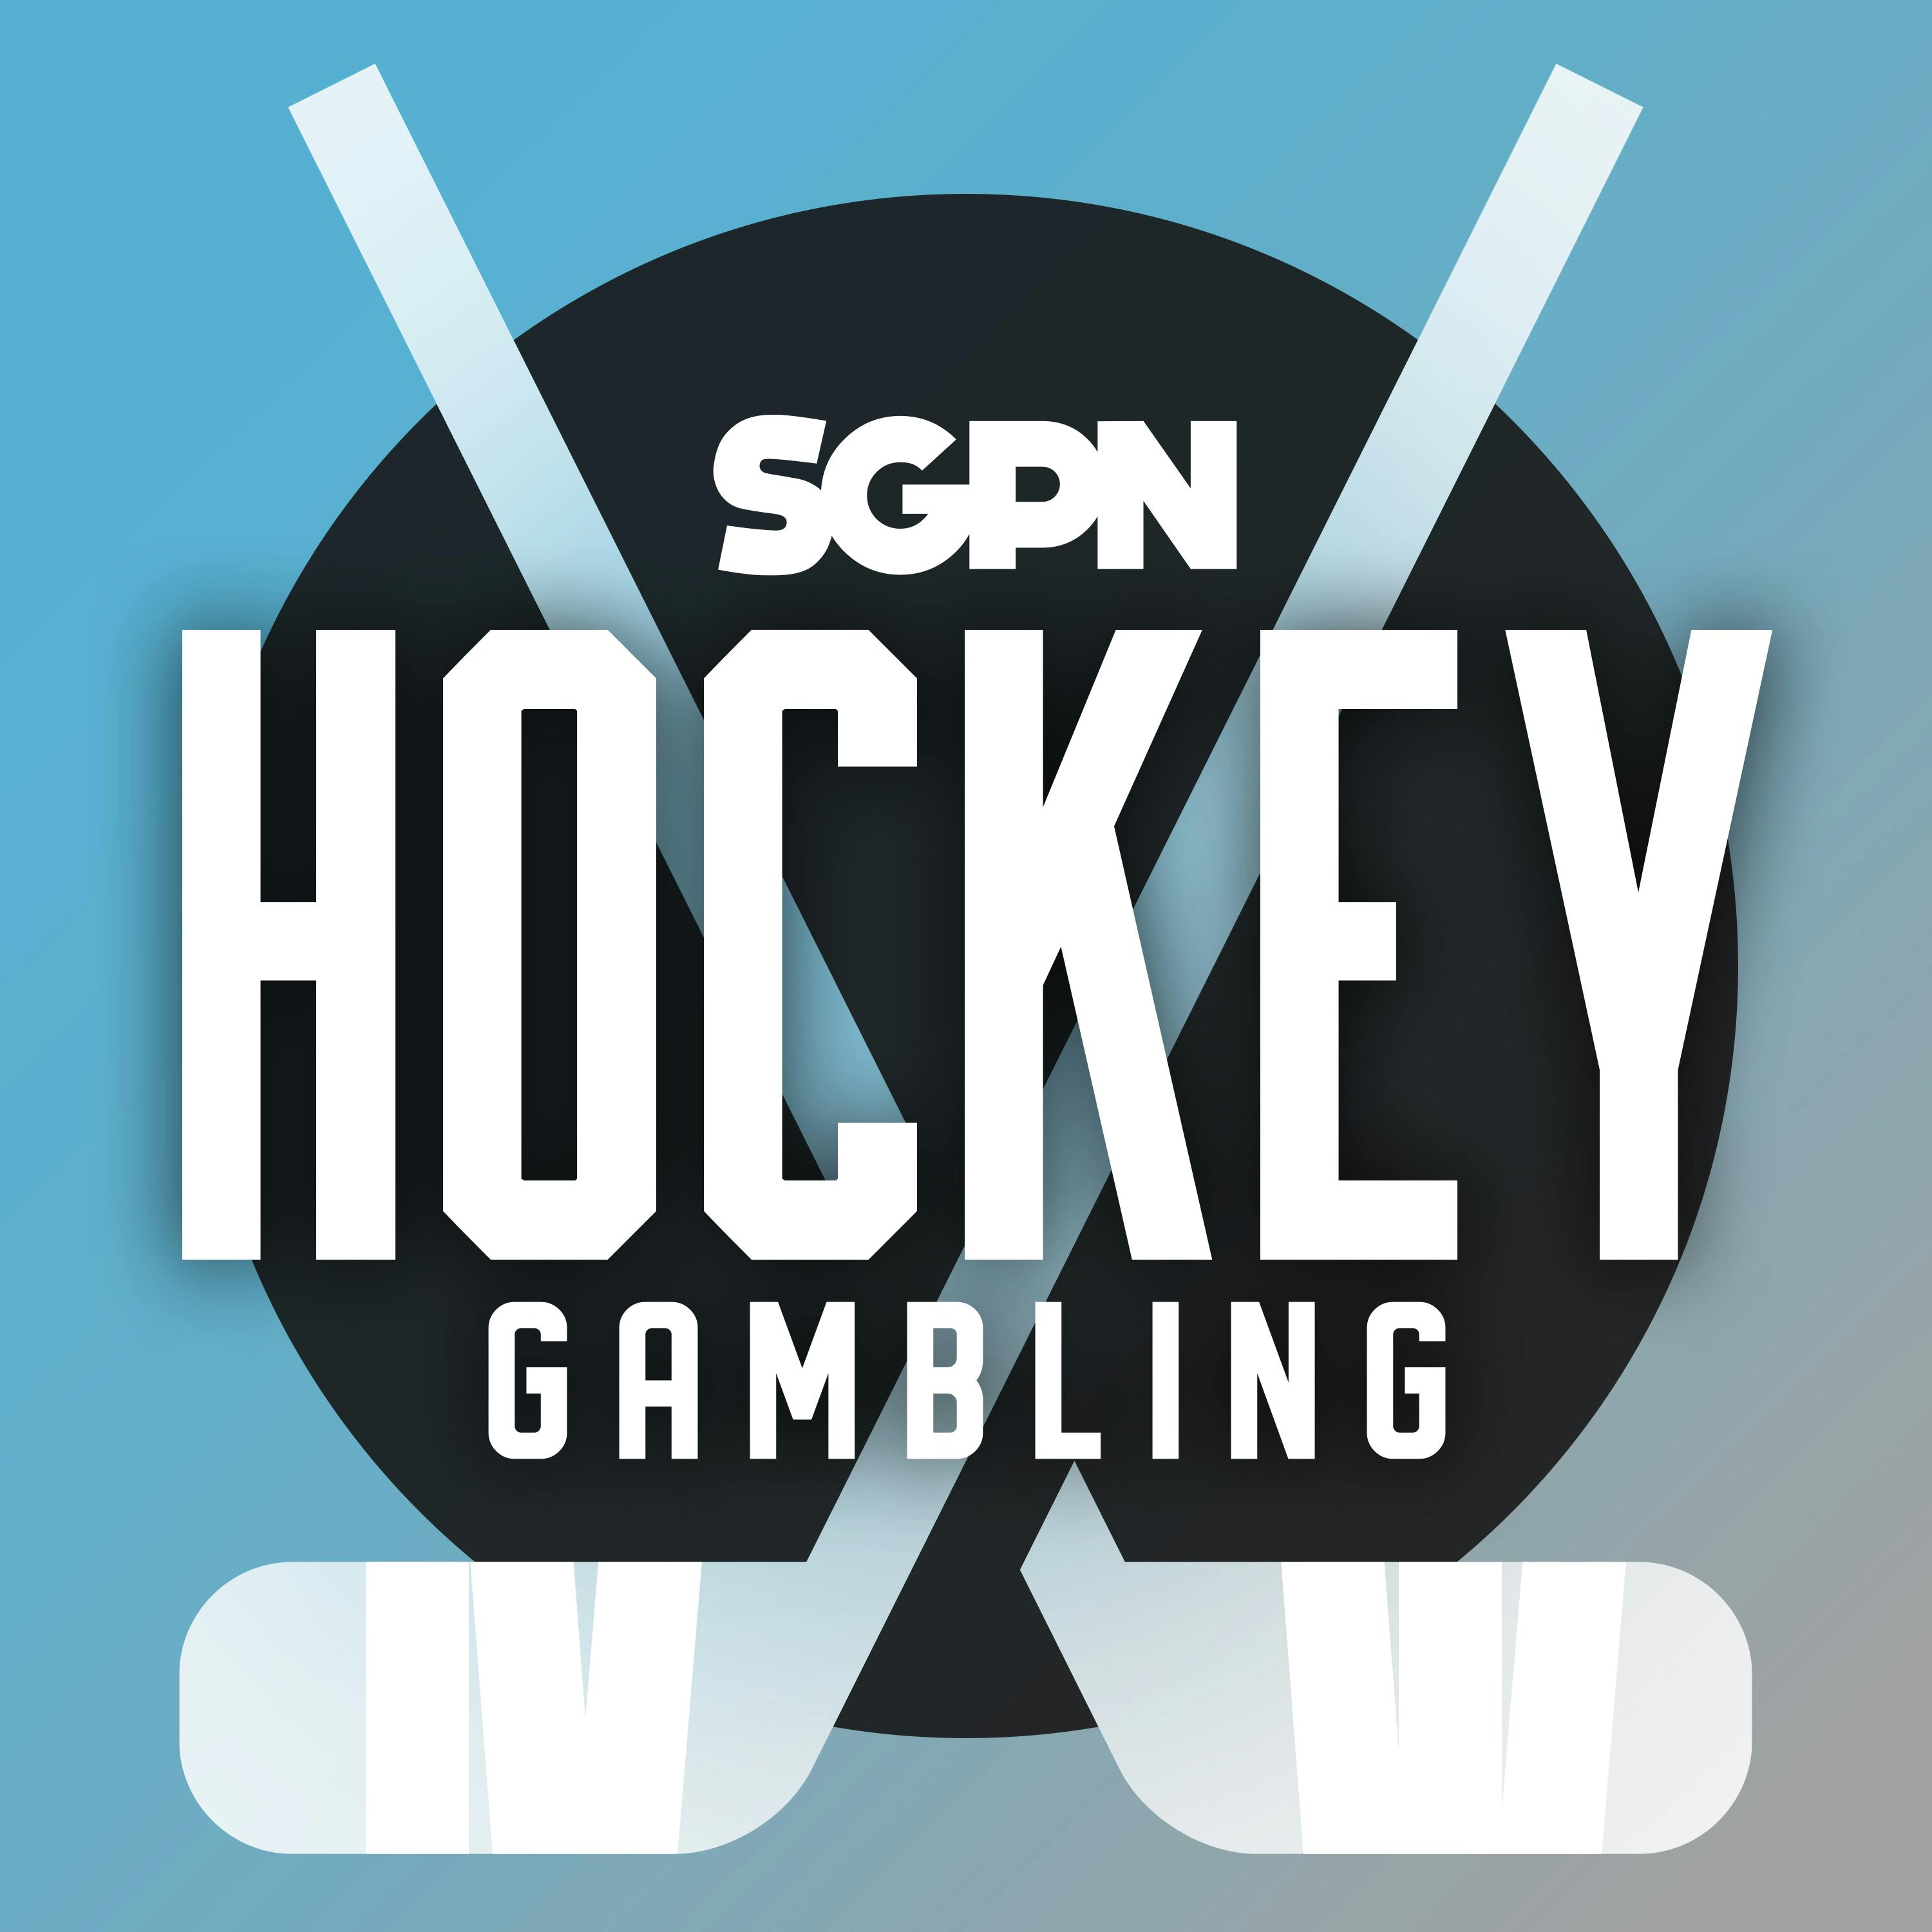 NHL Playoffs Betting Picks & Player Props - Wed, April 24 (Ep. 350)